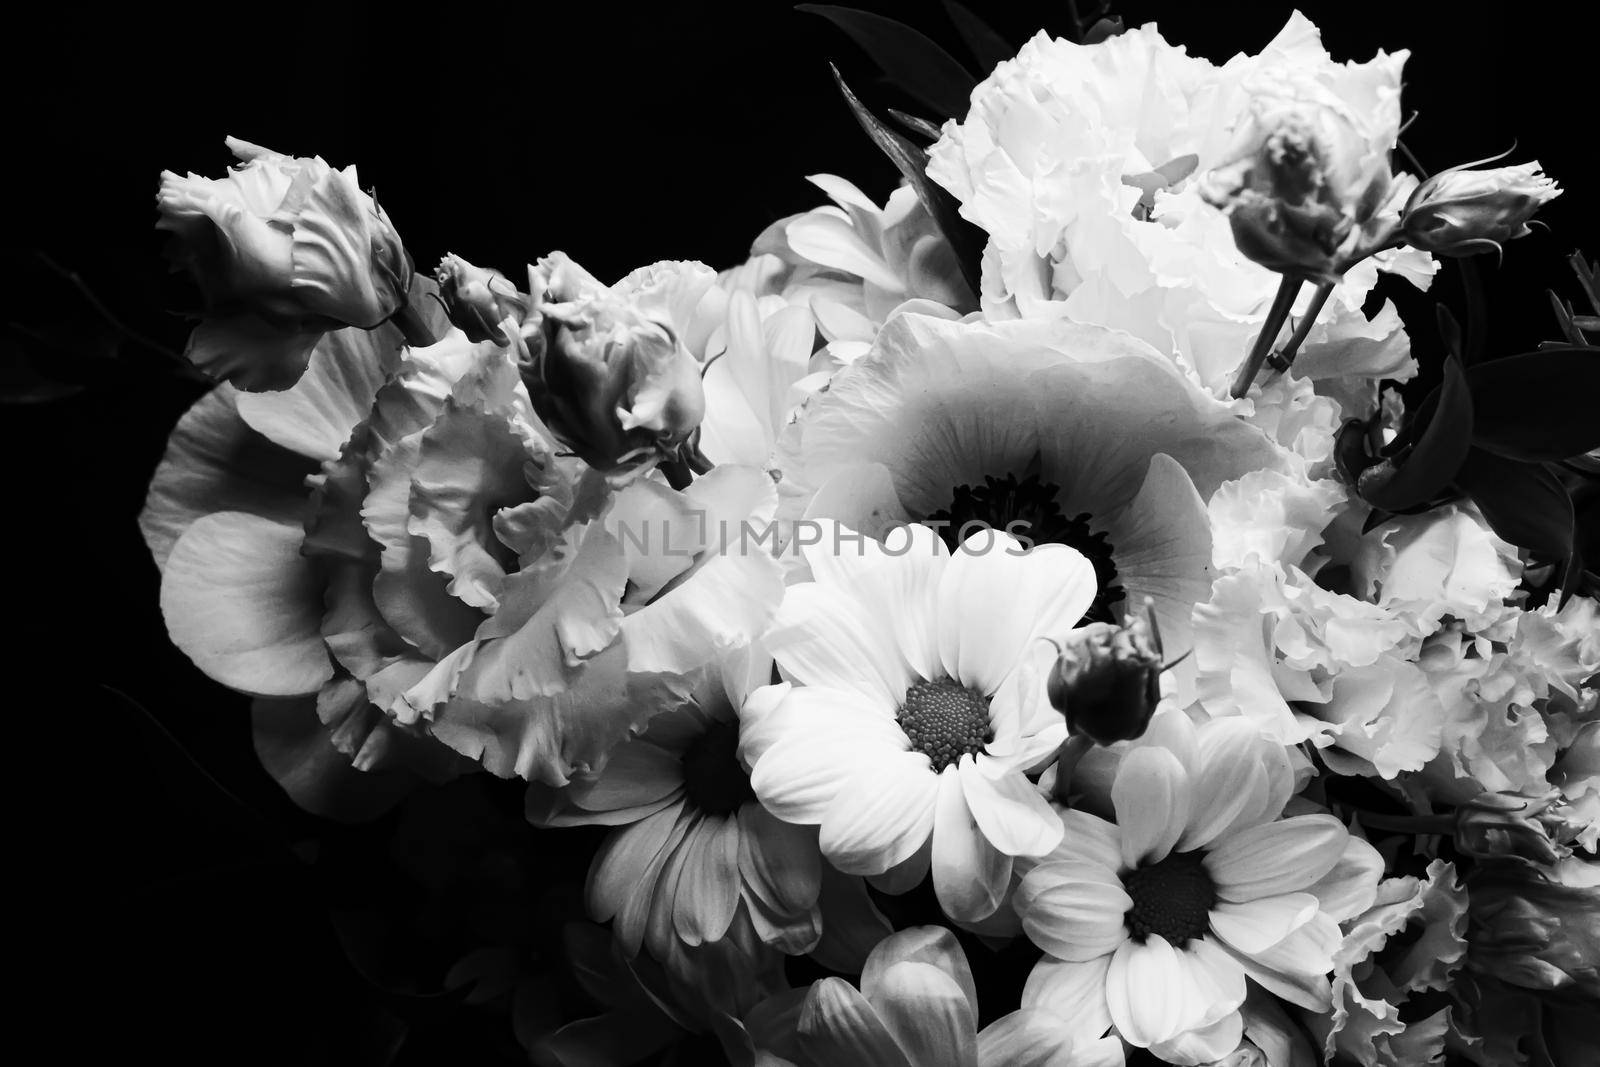 Flower bouquet as beautiful floral arrangement, creative flowers and floristic design, classic black and white monochrome by Anneleven